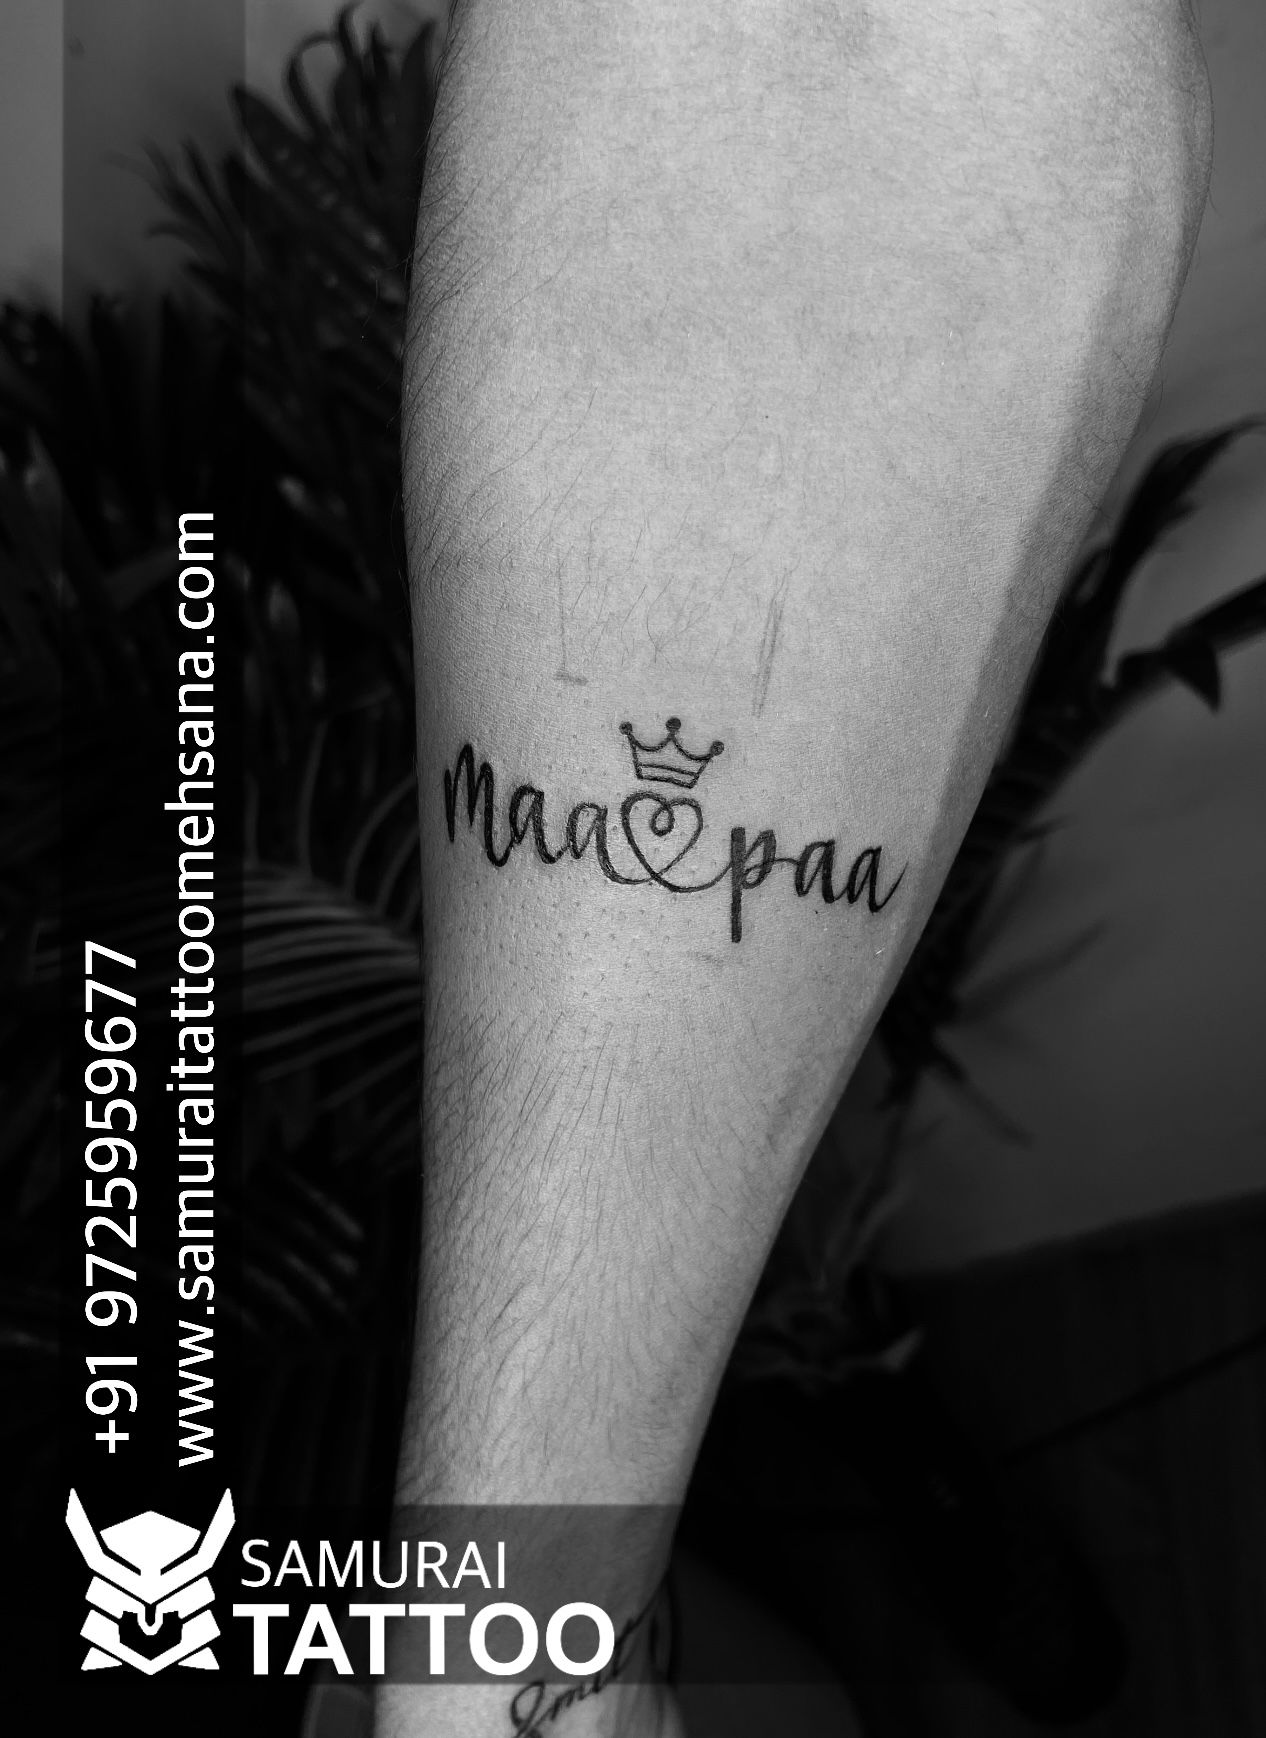 Maa paa tattoo with peacock feather done at xpose tattoos jaipur